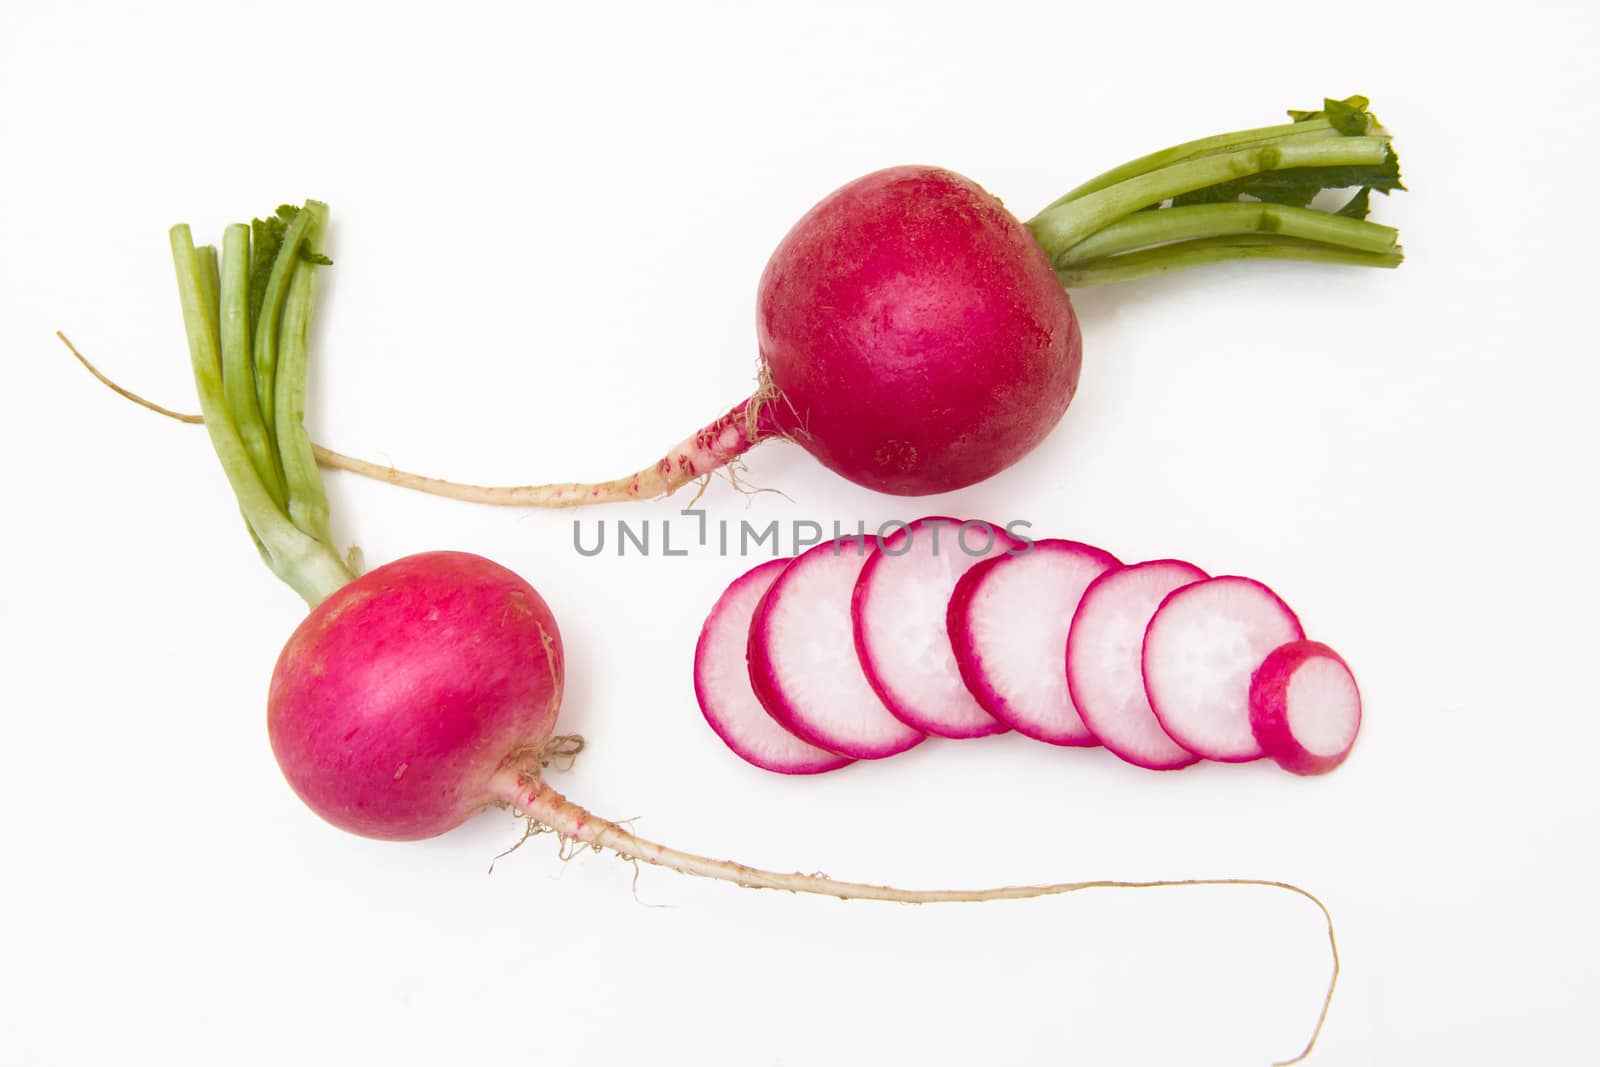 Sliced radishes by spafra